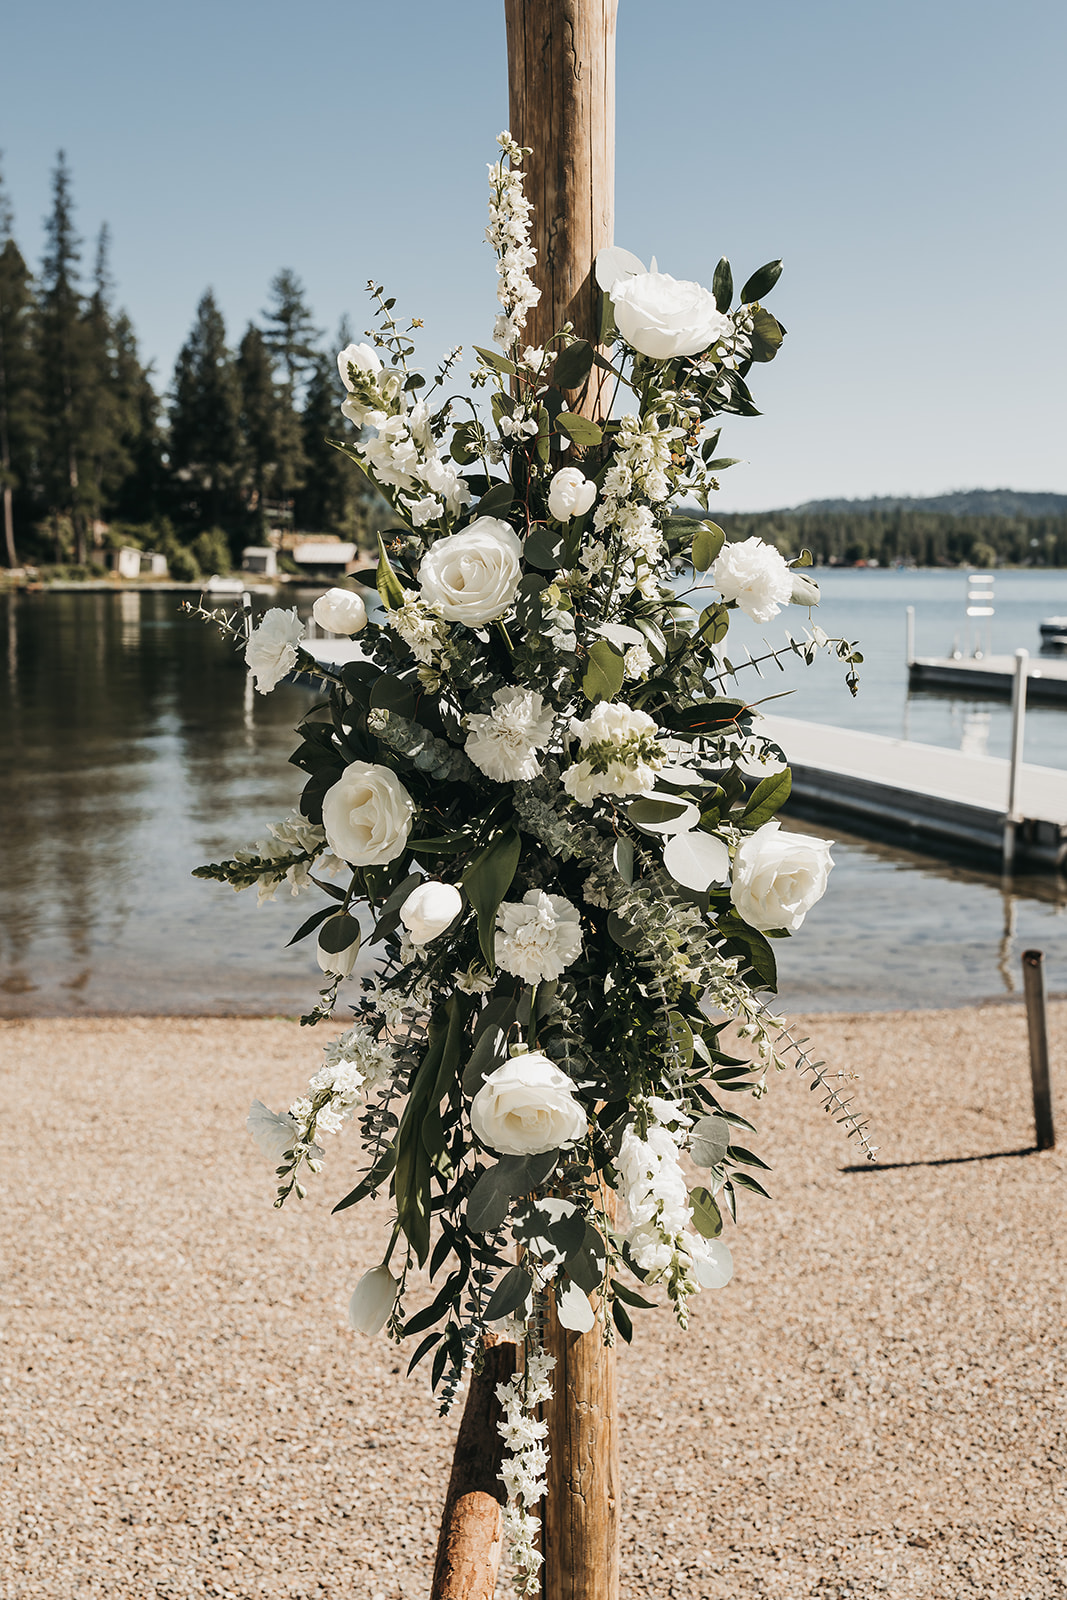 Florals by Emily McBride with Mcbride floral design. Lake side views with private dock